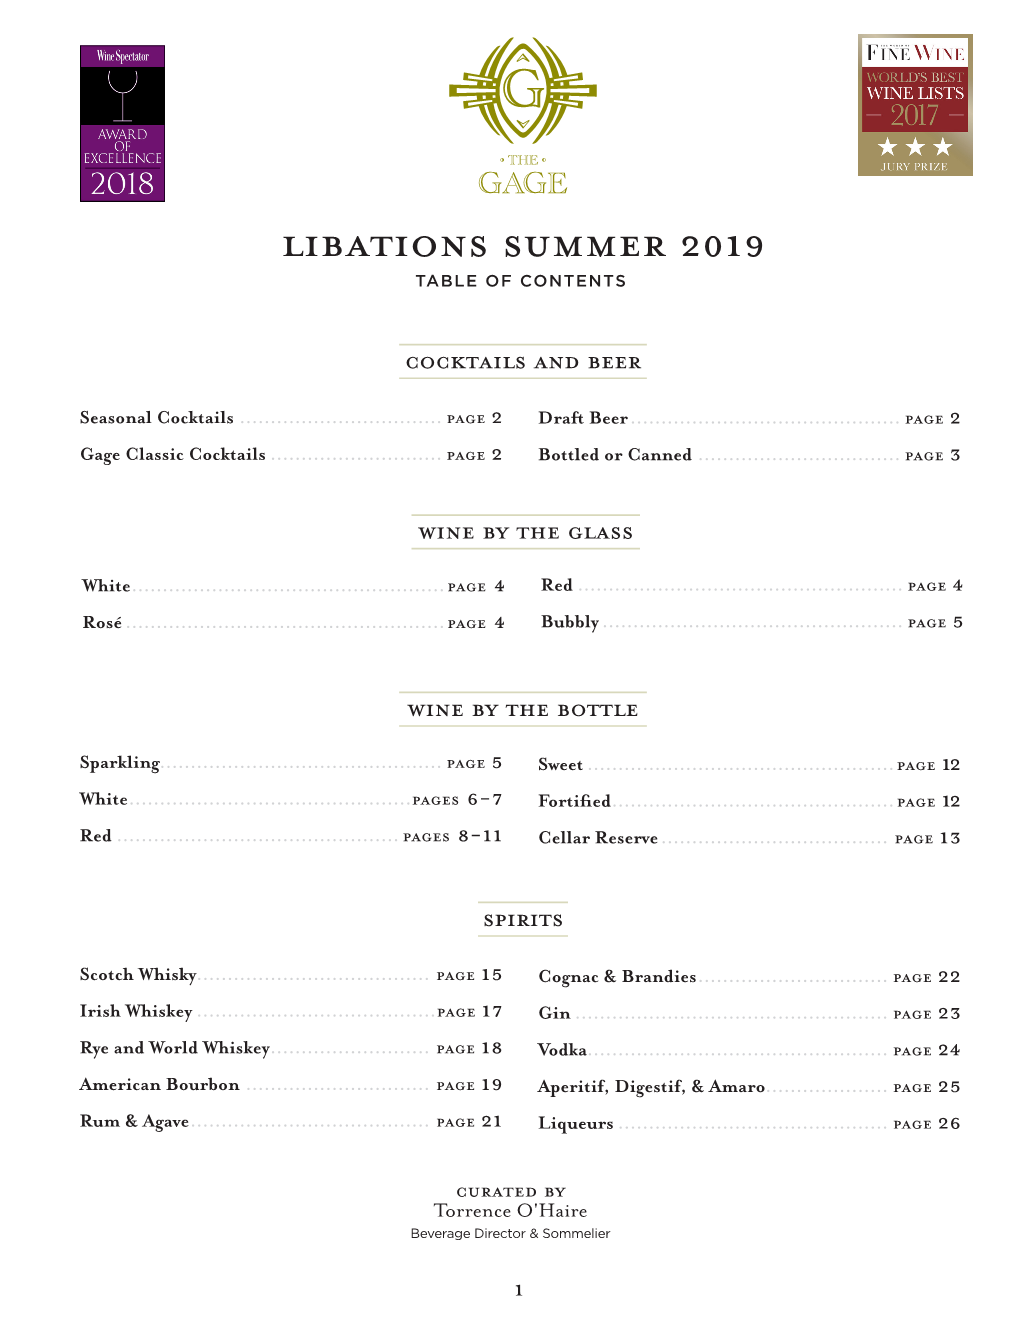 Libations SUMMER 2019 TABLE of CONTENTS